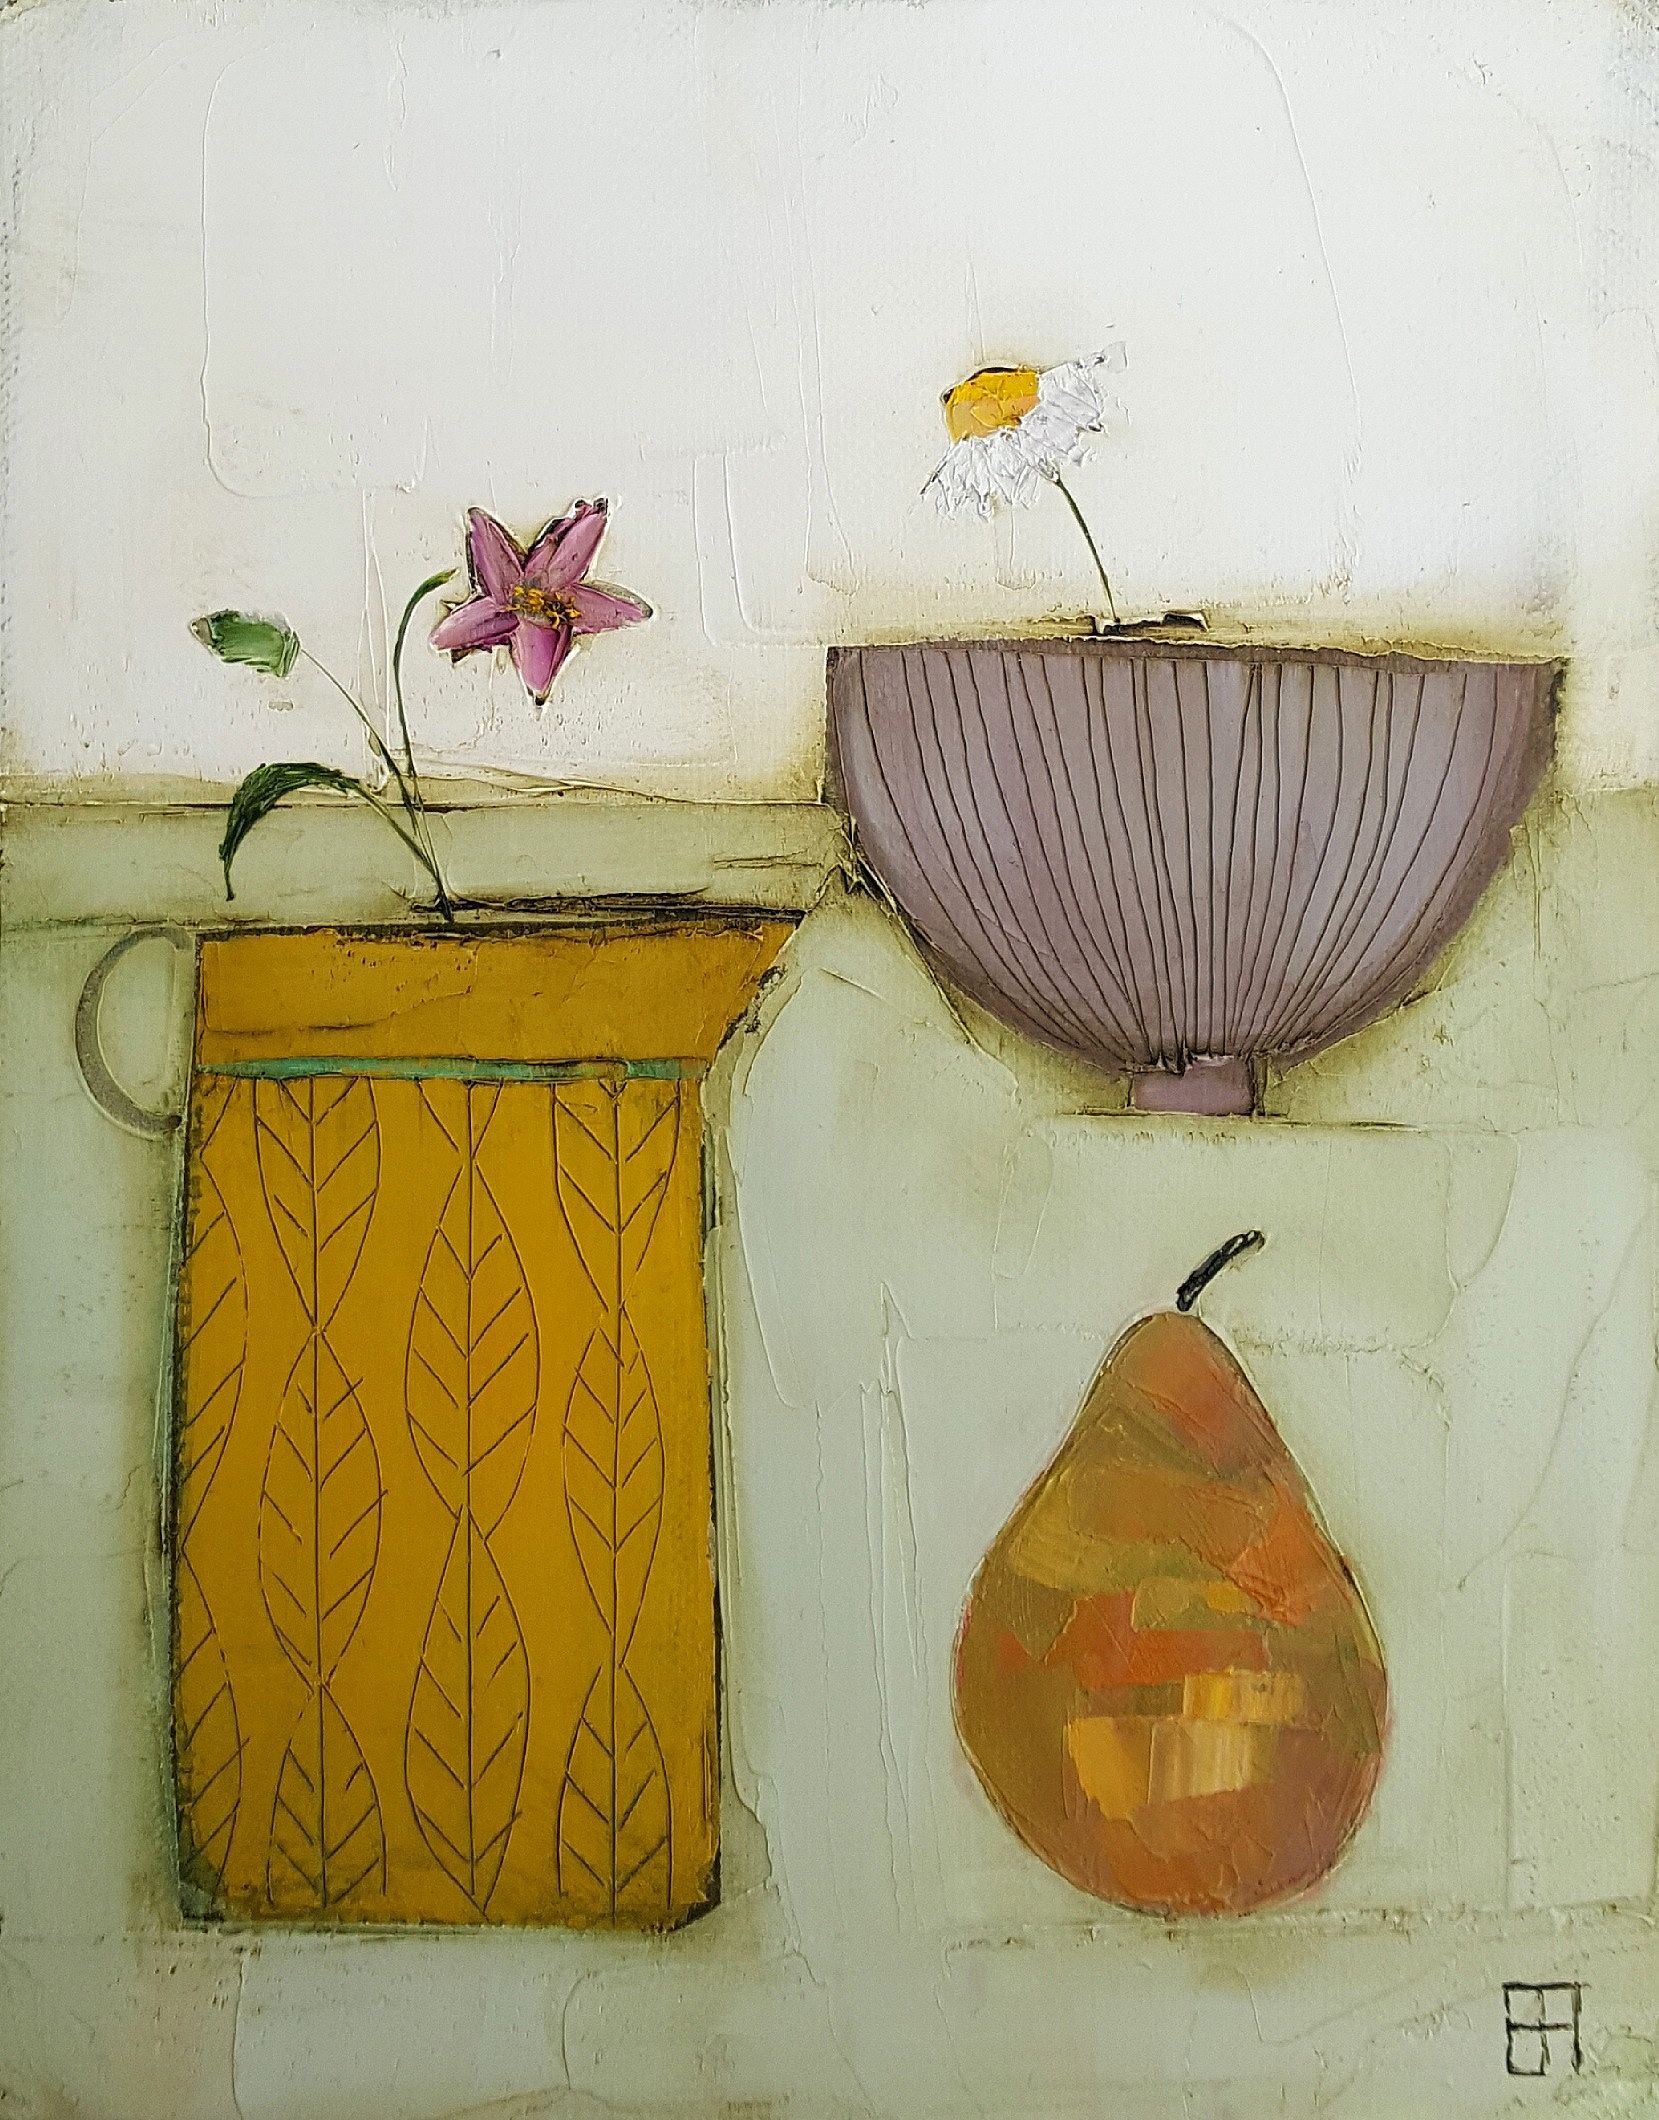 Eithne  Roberts - Mustard jug and pear